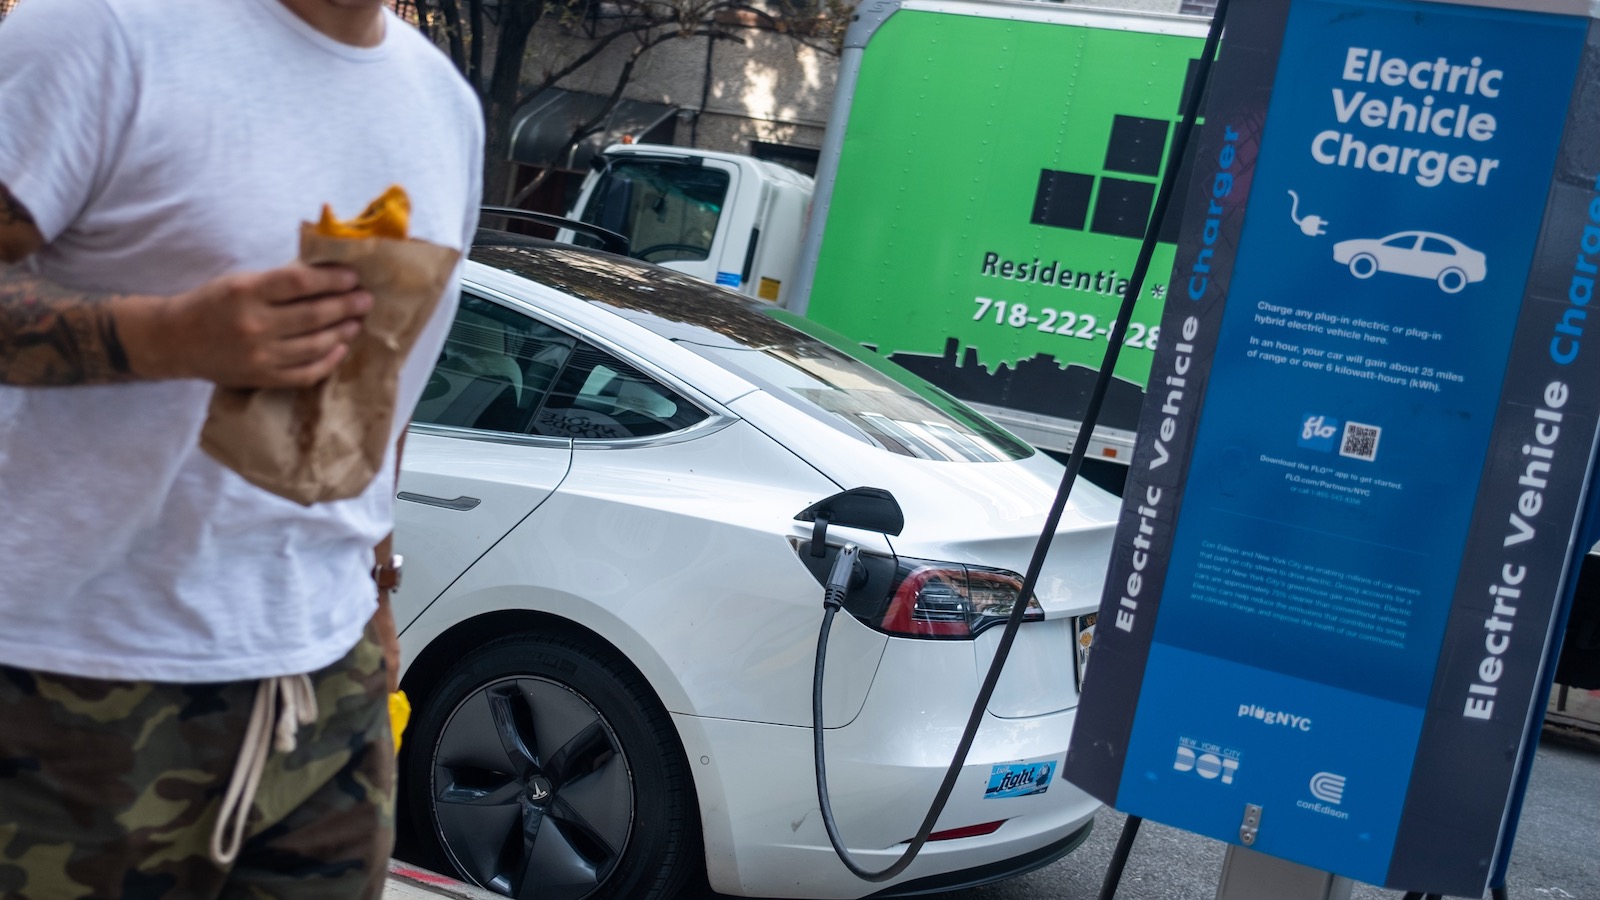 A man wearing shorts and a T-shirt and eating a burrito walks past a white Tesla Model S plugged into a public charging station in New York City.